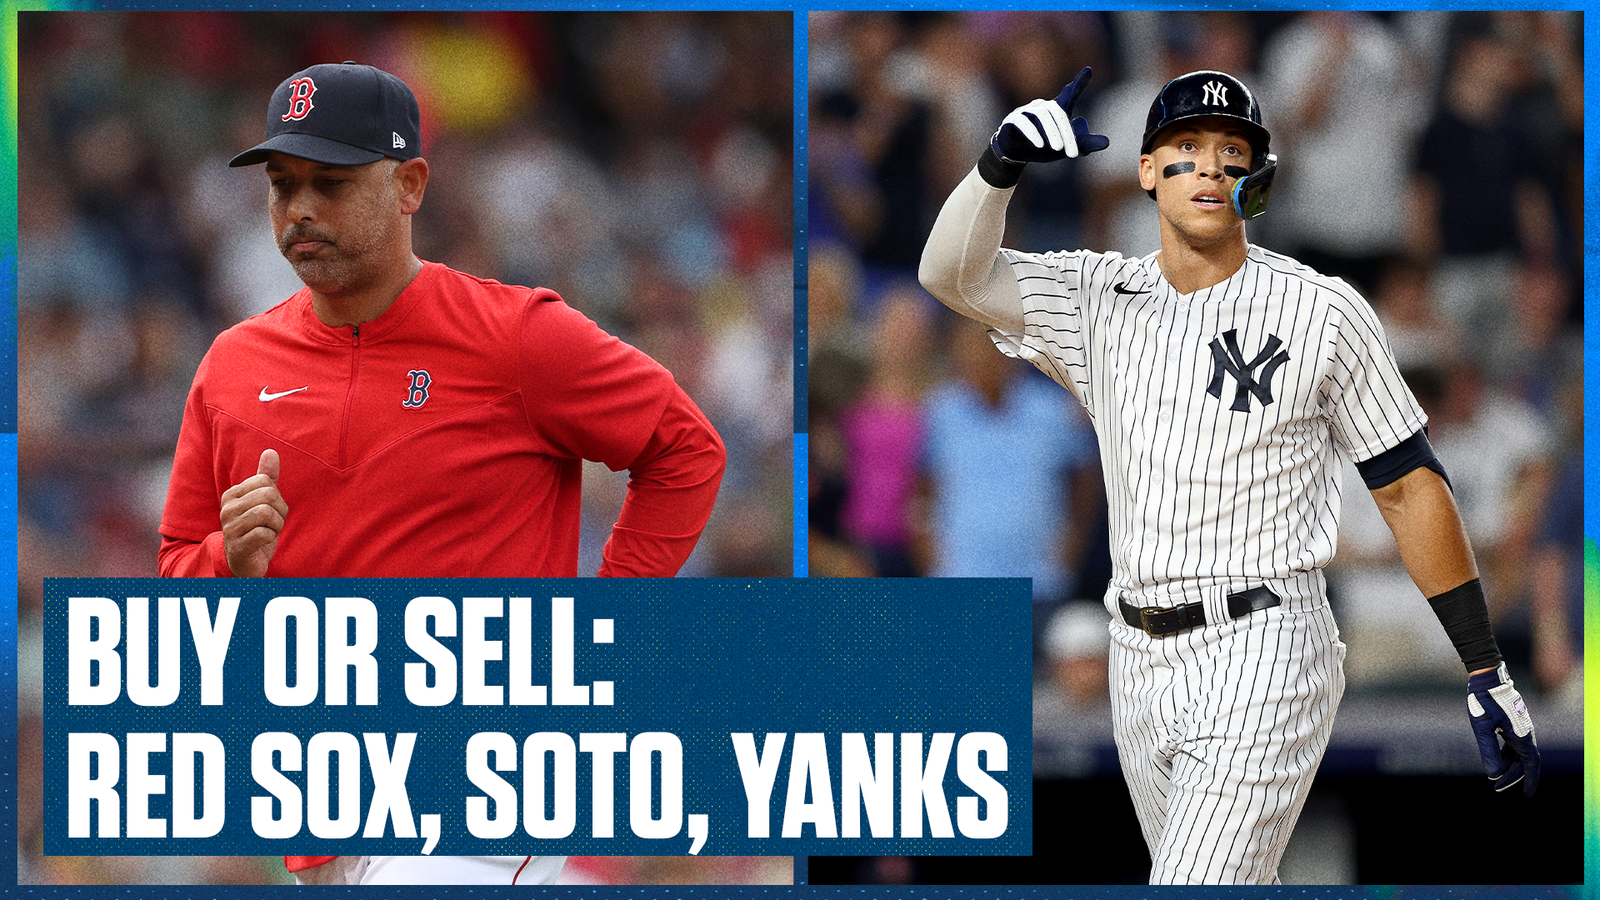 Will the Red Sox be sellers at the deadline?